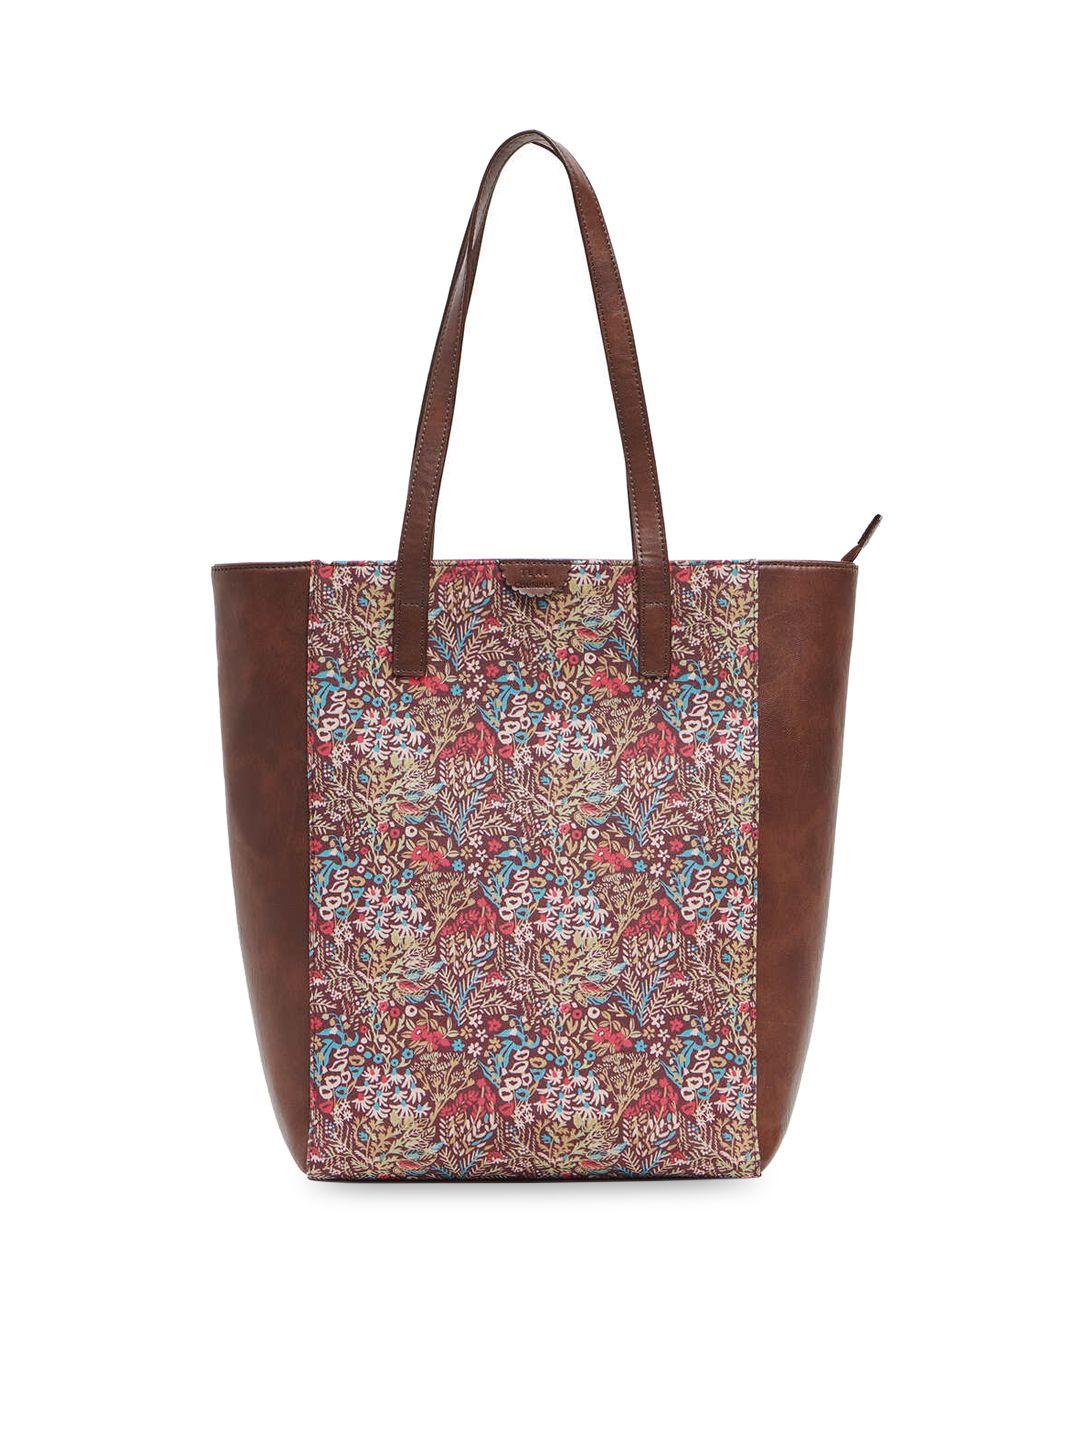 teal by chumbak floral printed oversized shopper tote bag